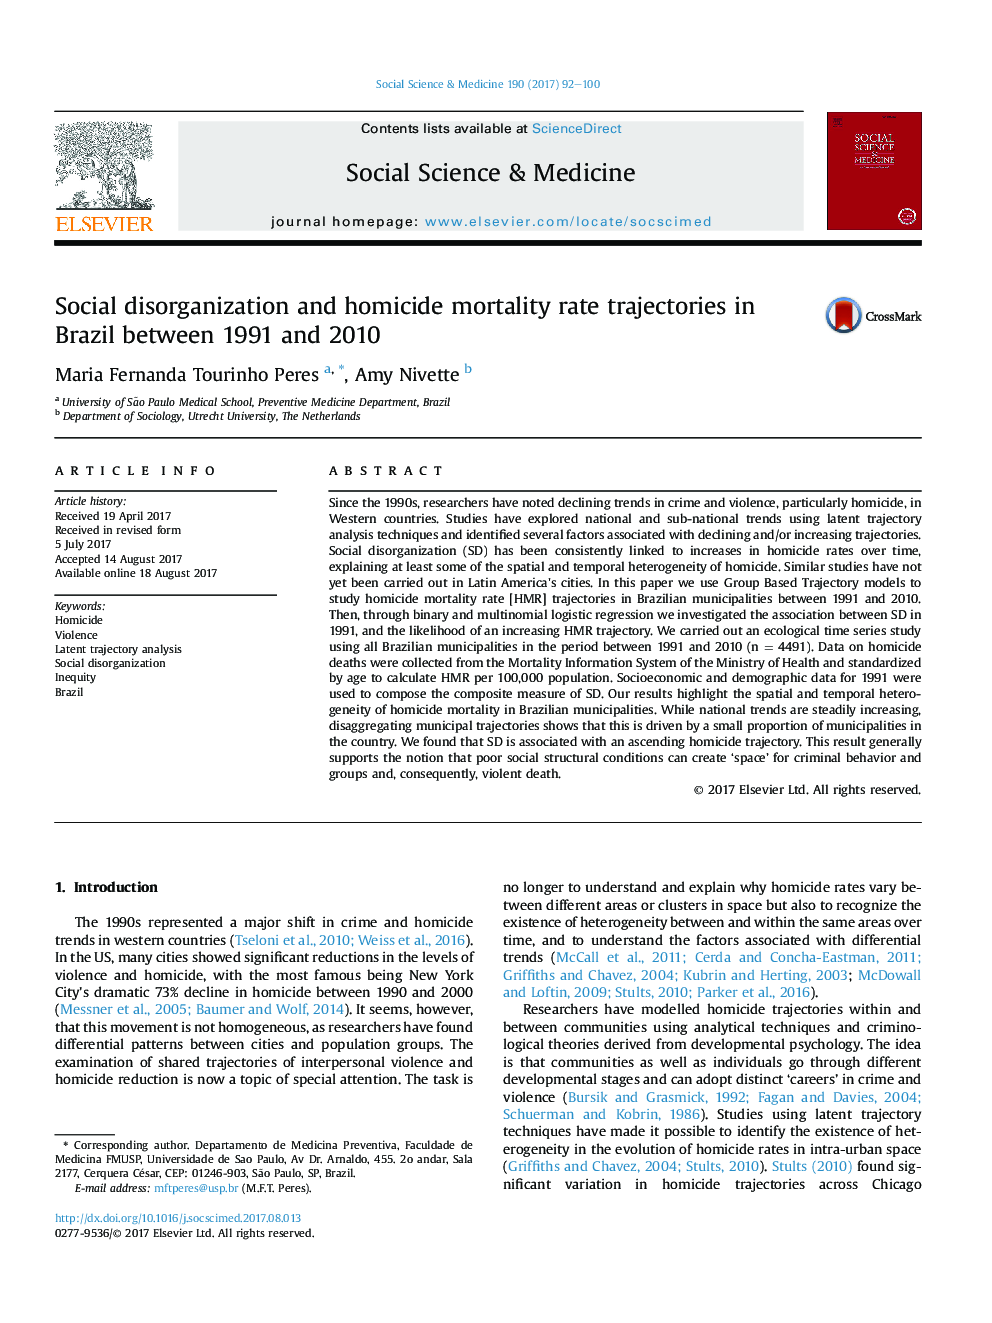 Social disorganization and homicide mortality rate trajectories in Brazil between 1991 and 2010